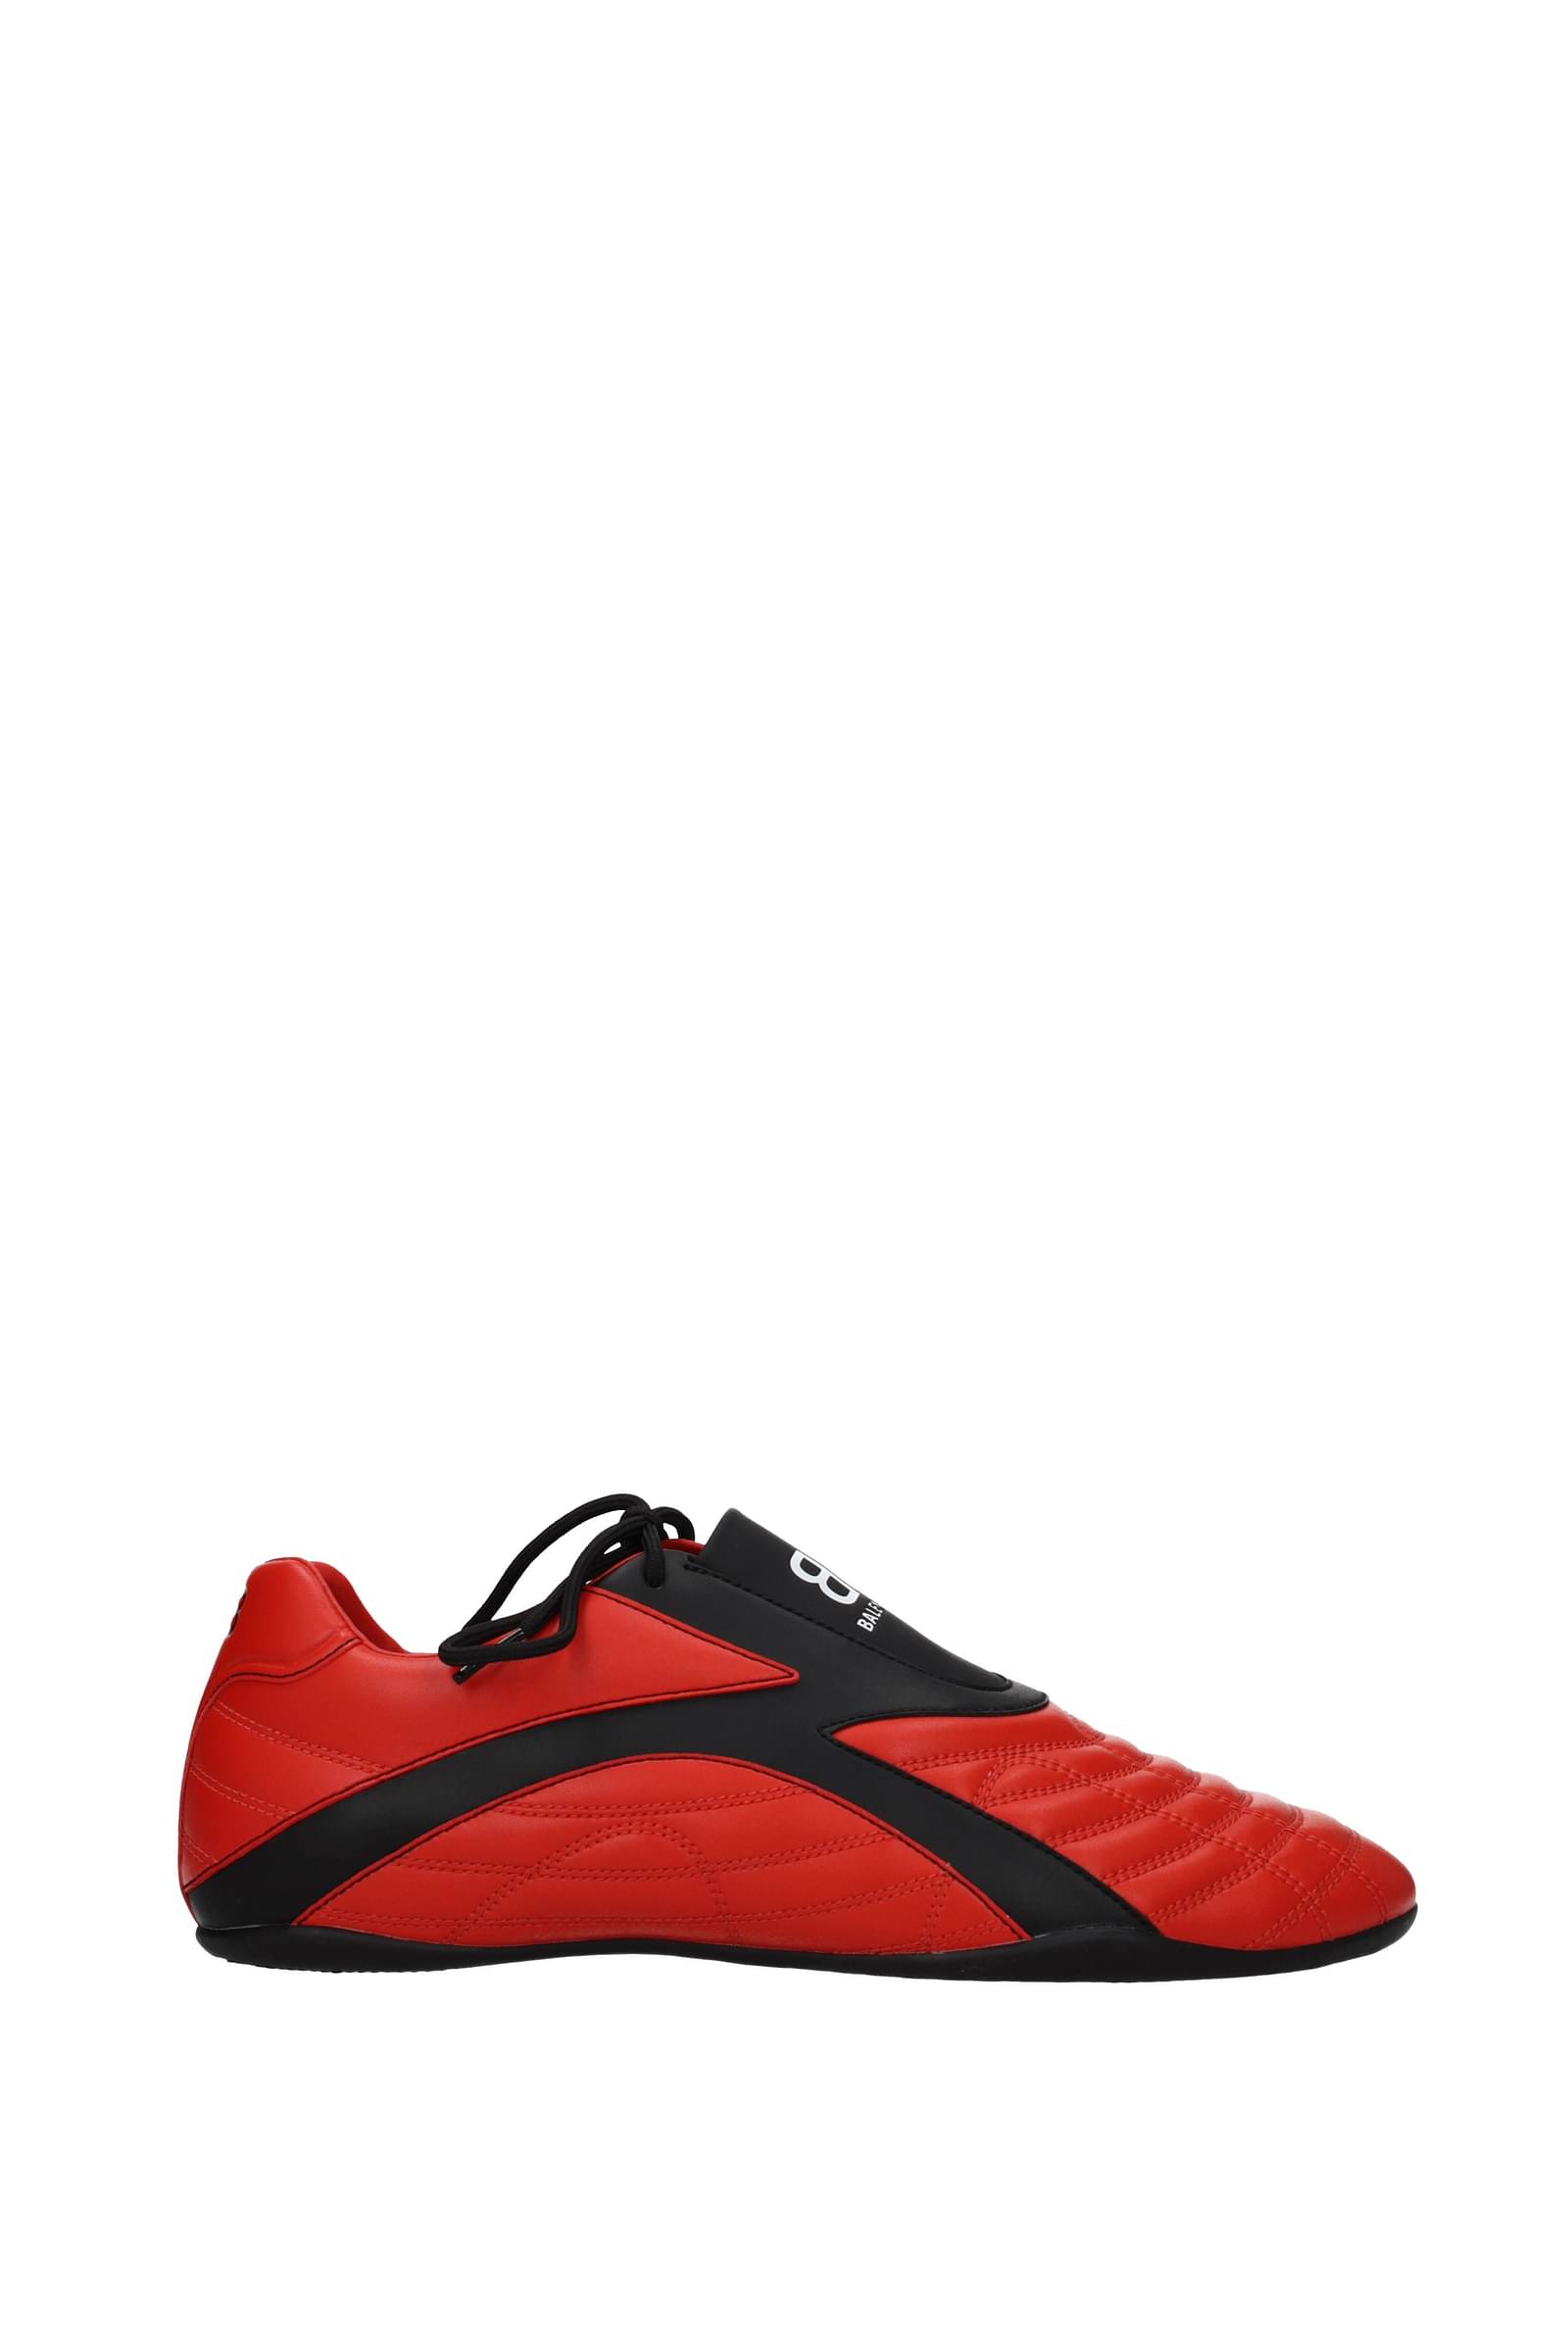 Balenciaga Triple S sneakers for Men  Red in UAE  Level Shoes